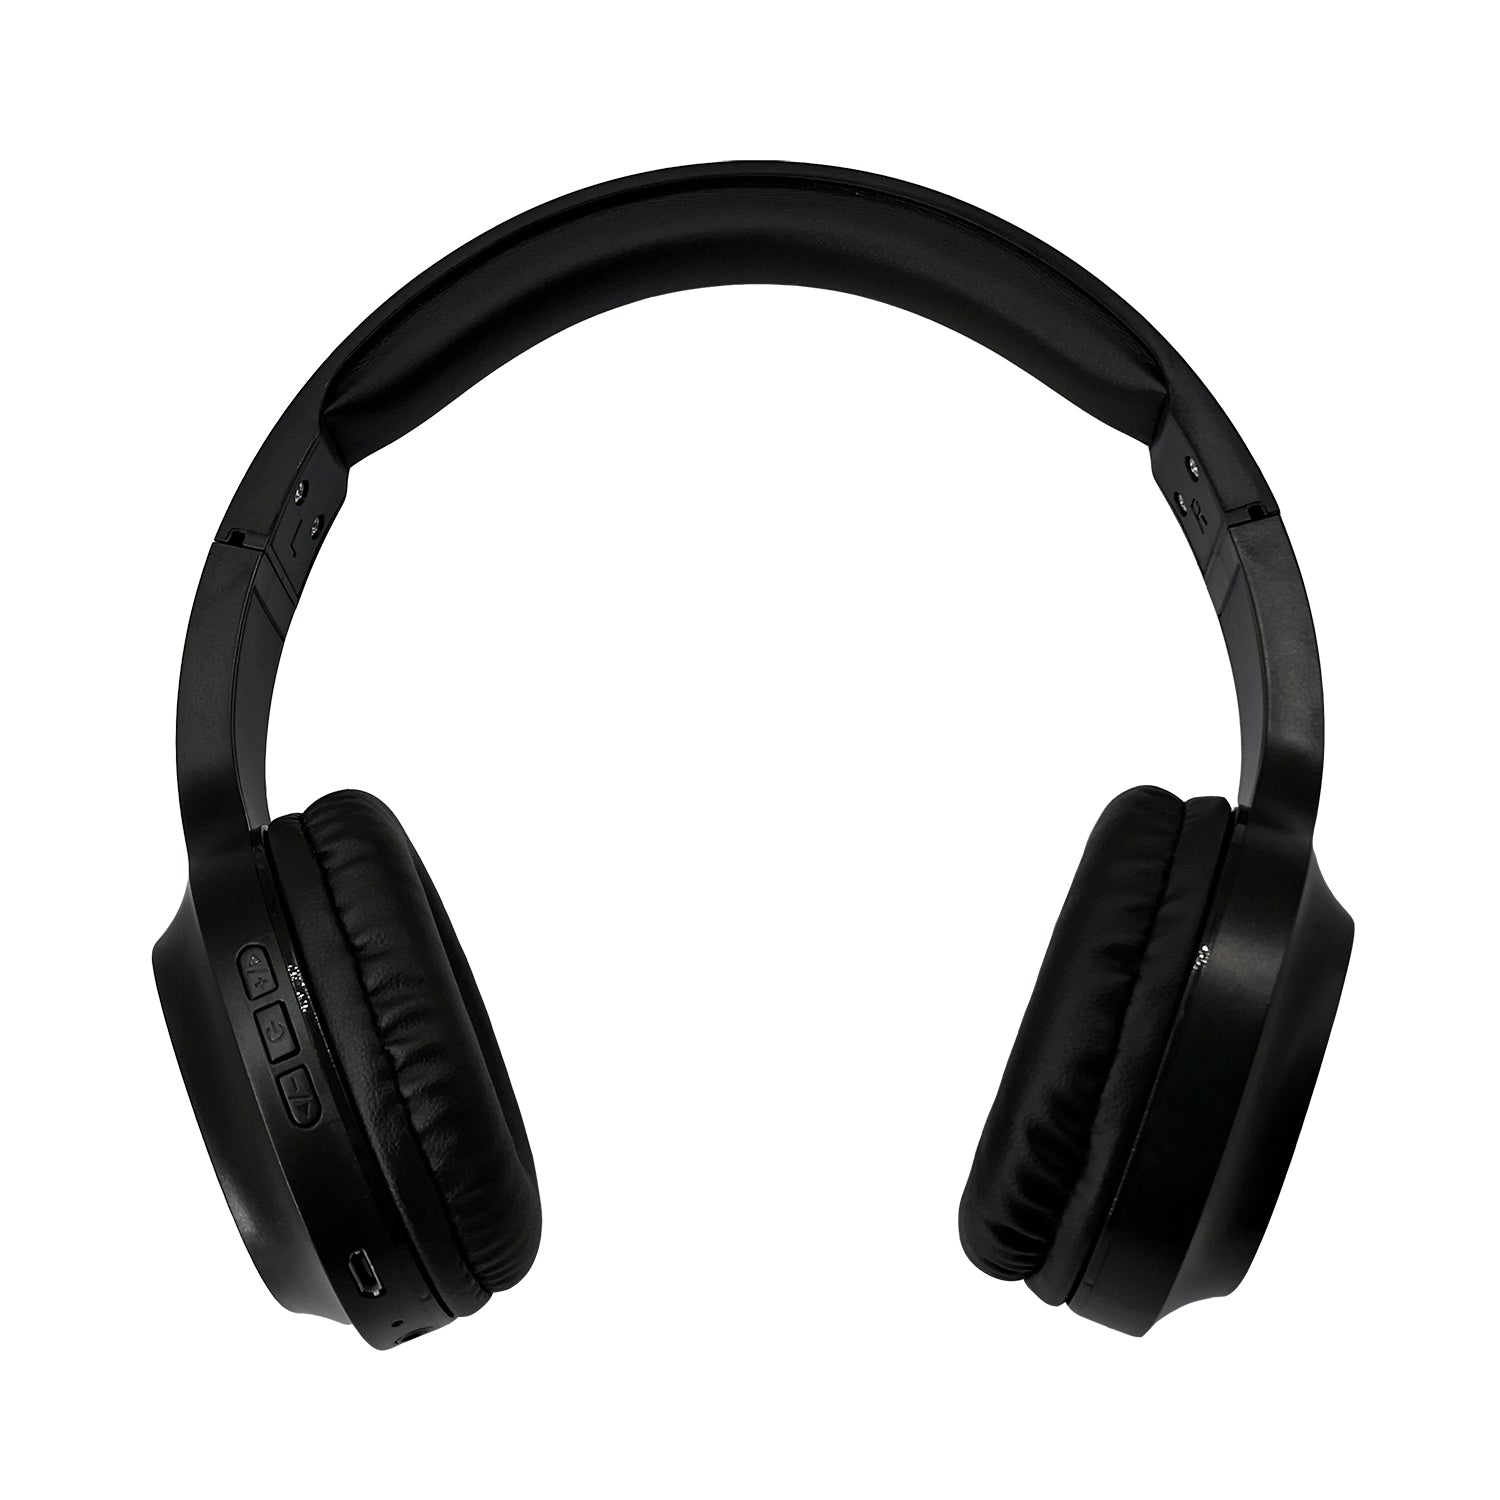 Photo of Morpheus 360 Tremors Wireless on-ear Headphones - Black, front view displays Power on/off button, Volume up/down, and track forward/backward buttons.